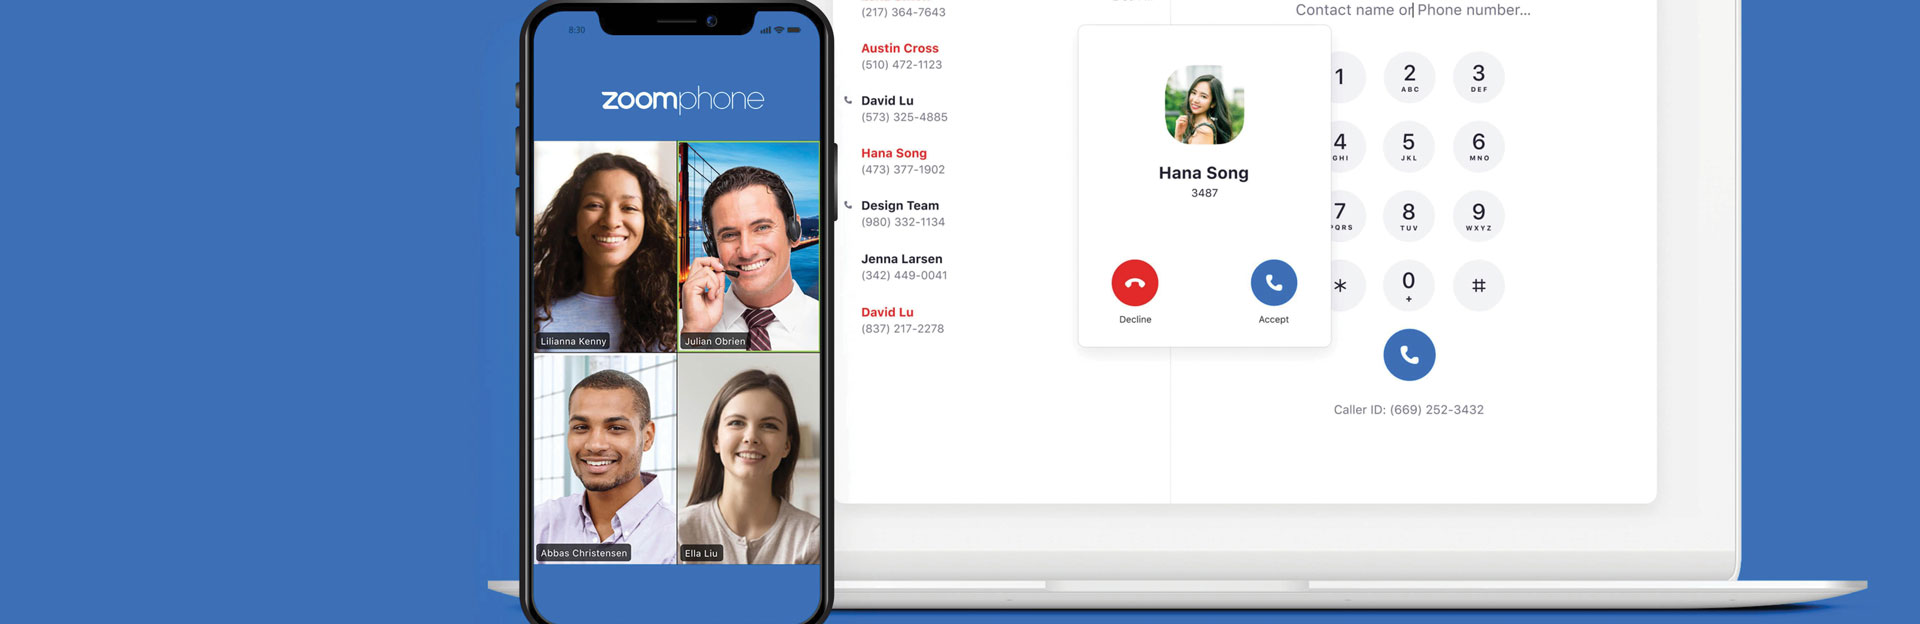 Zoom Phone: A Powerful and Flexible Cloud Phone System